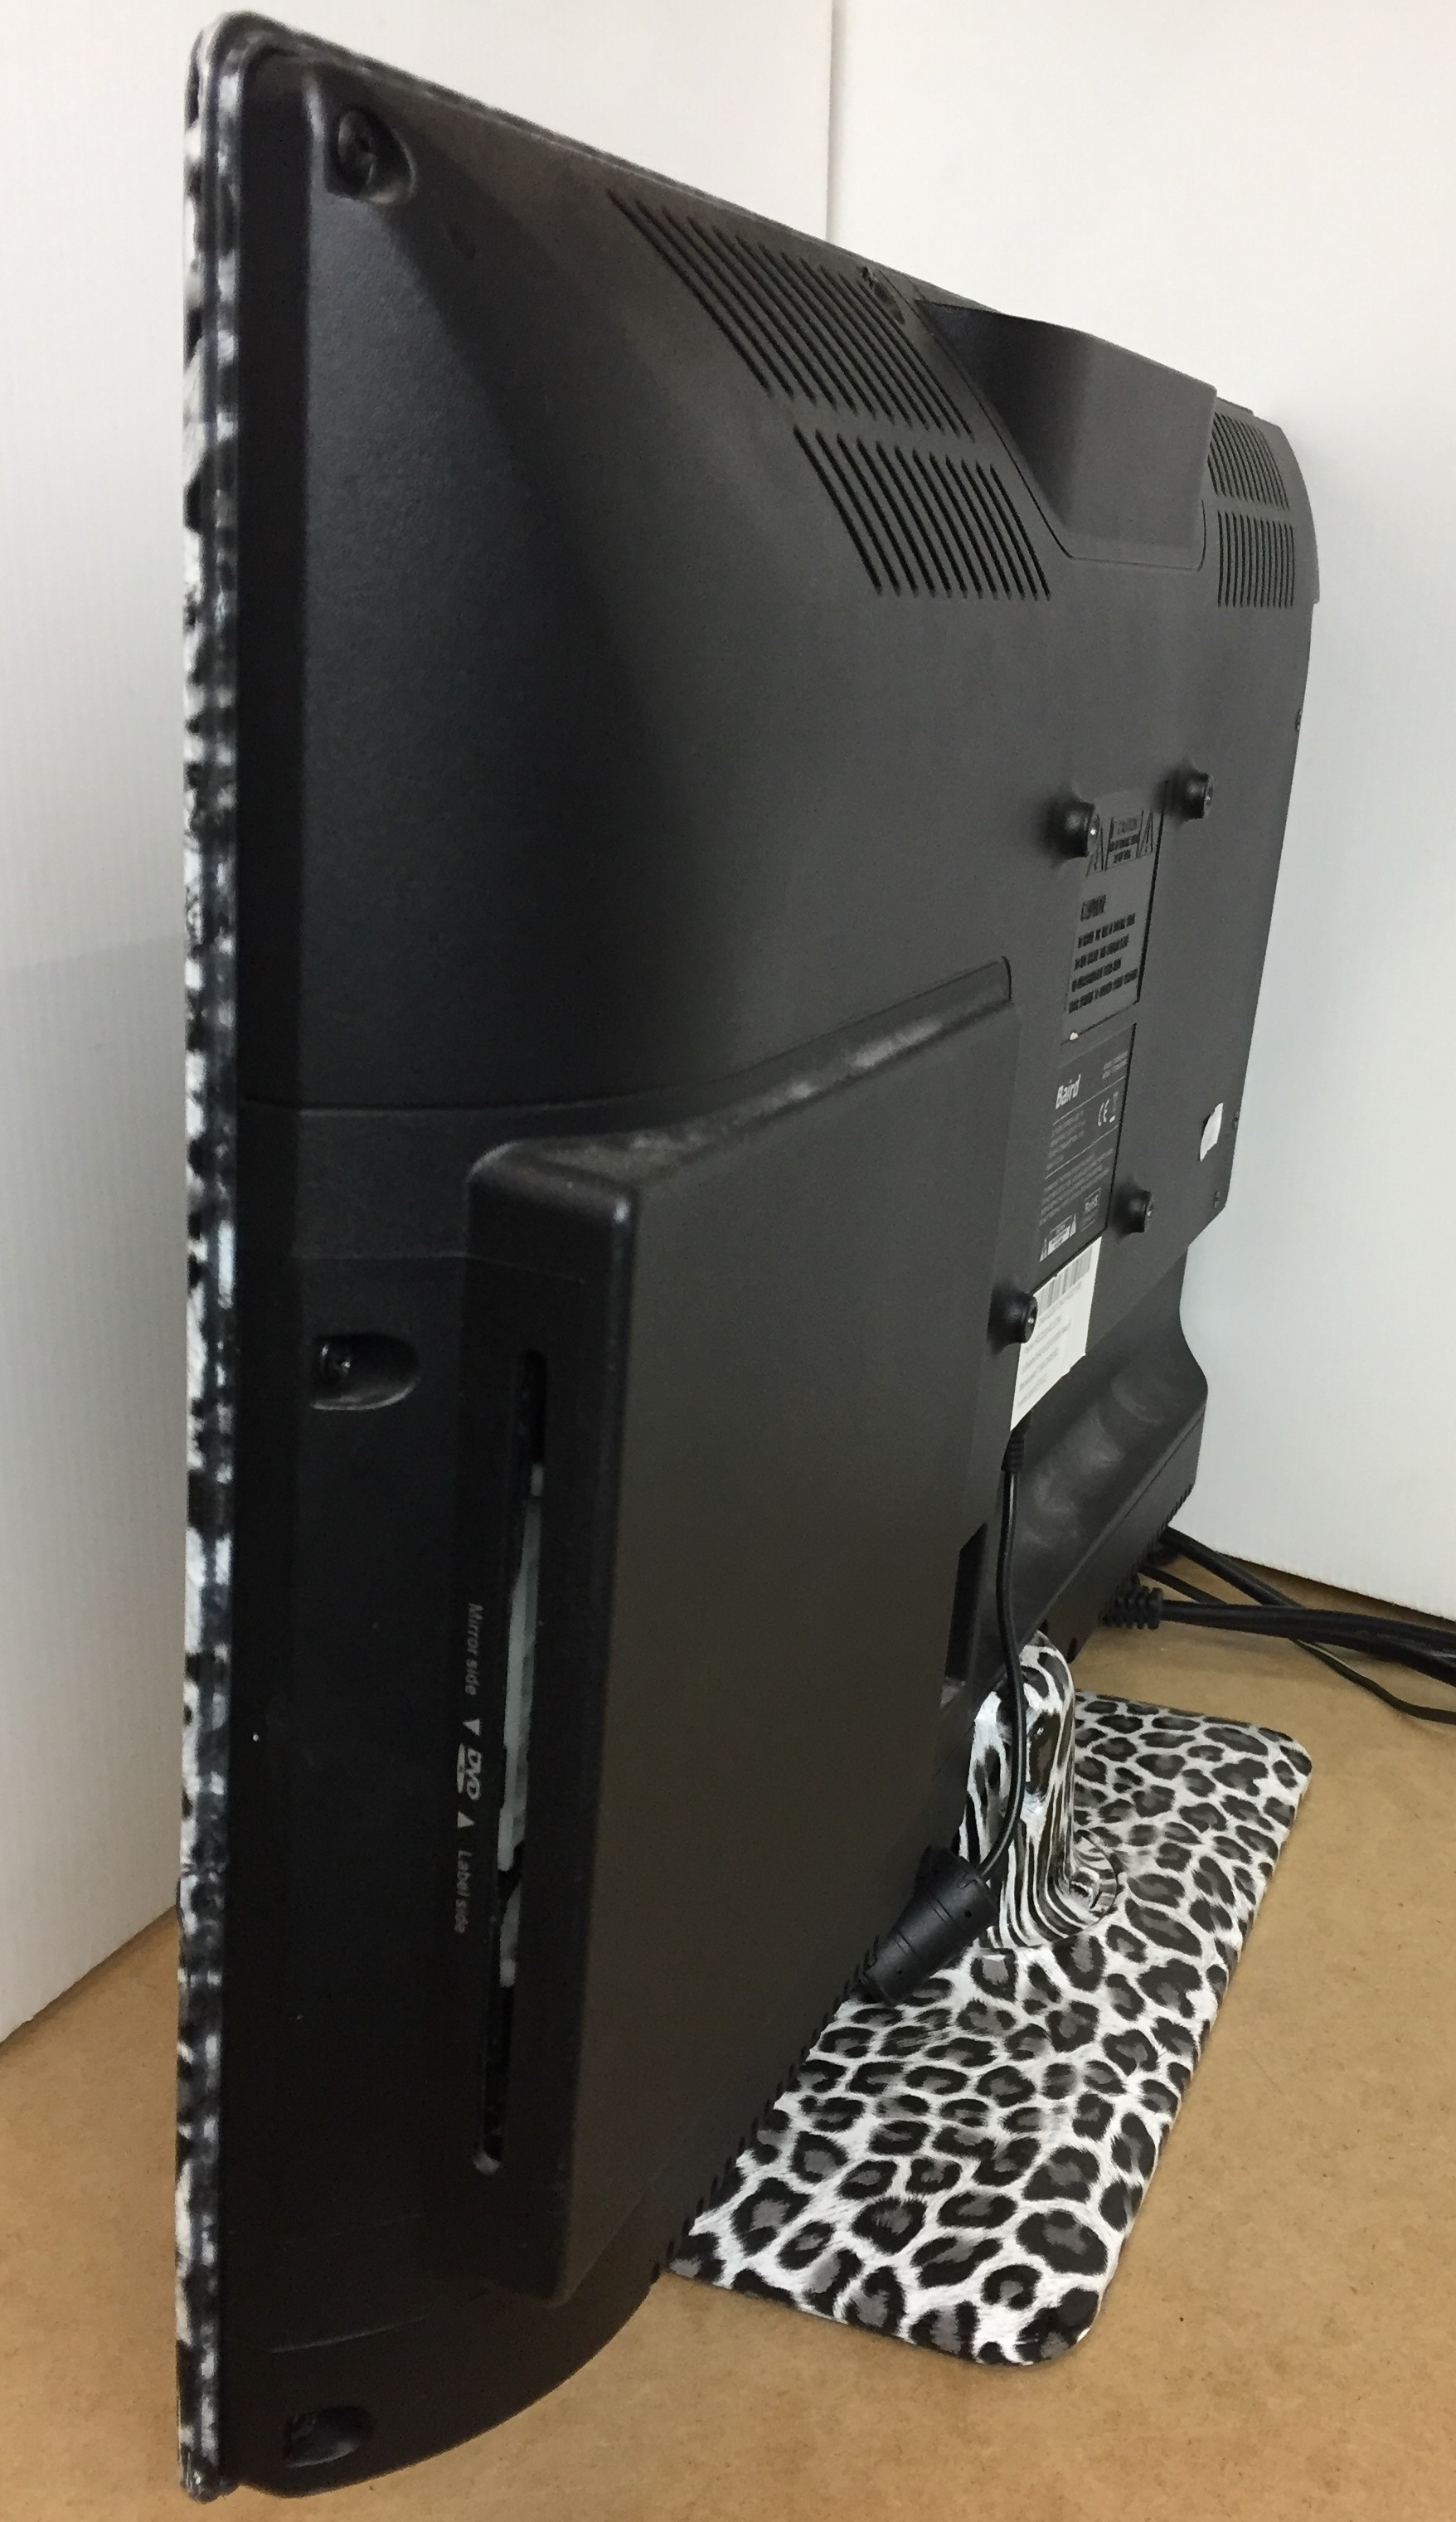 Baird T12205 DVD/AR leopard skin pattern combined 22 inch TV/DVD player (no remote) (Saleroom - Image 3 of 3